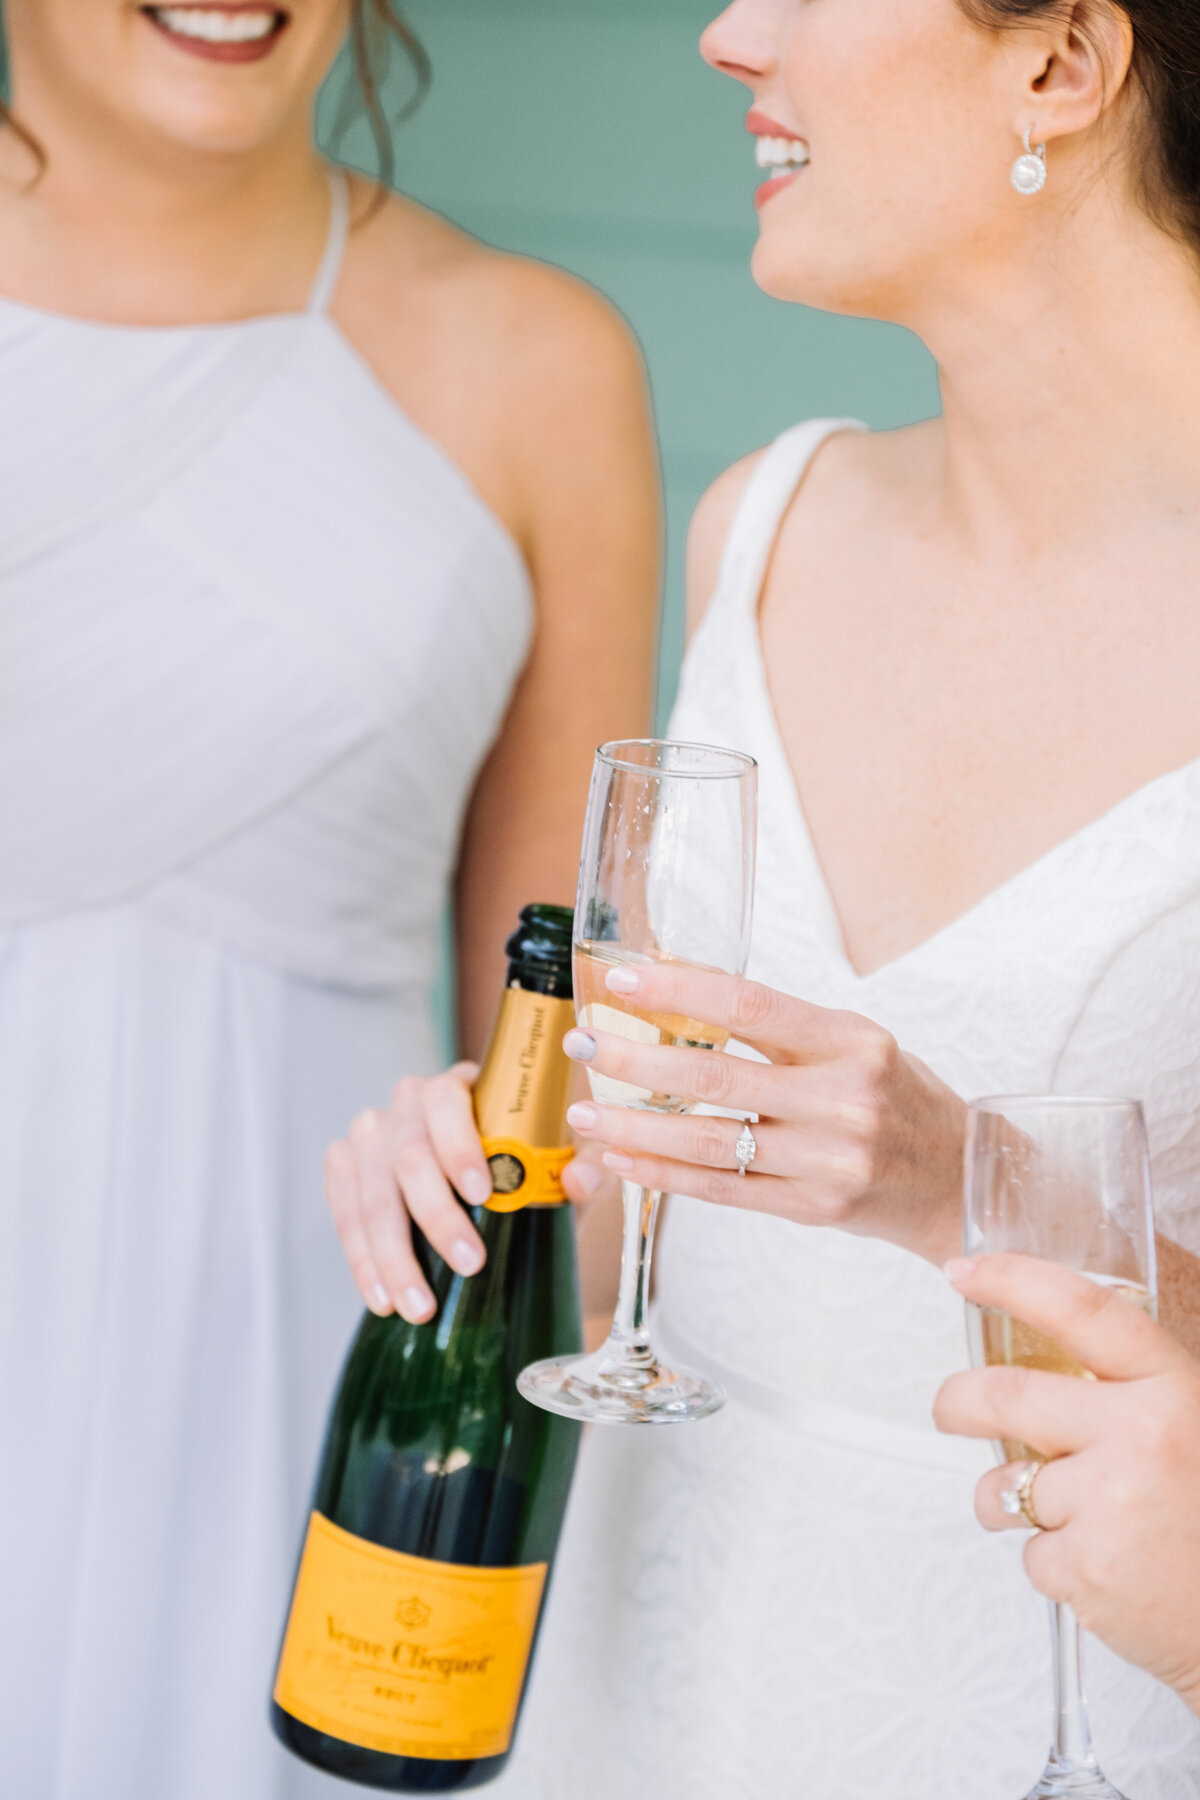 Bride and bridesmaid drink champagne on wedding day